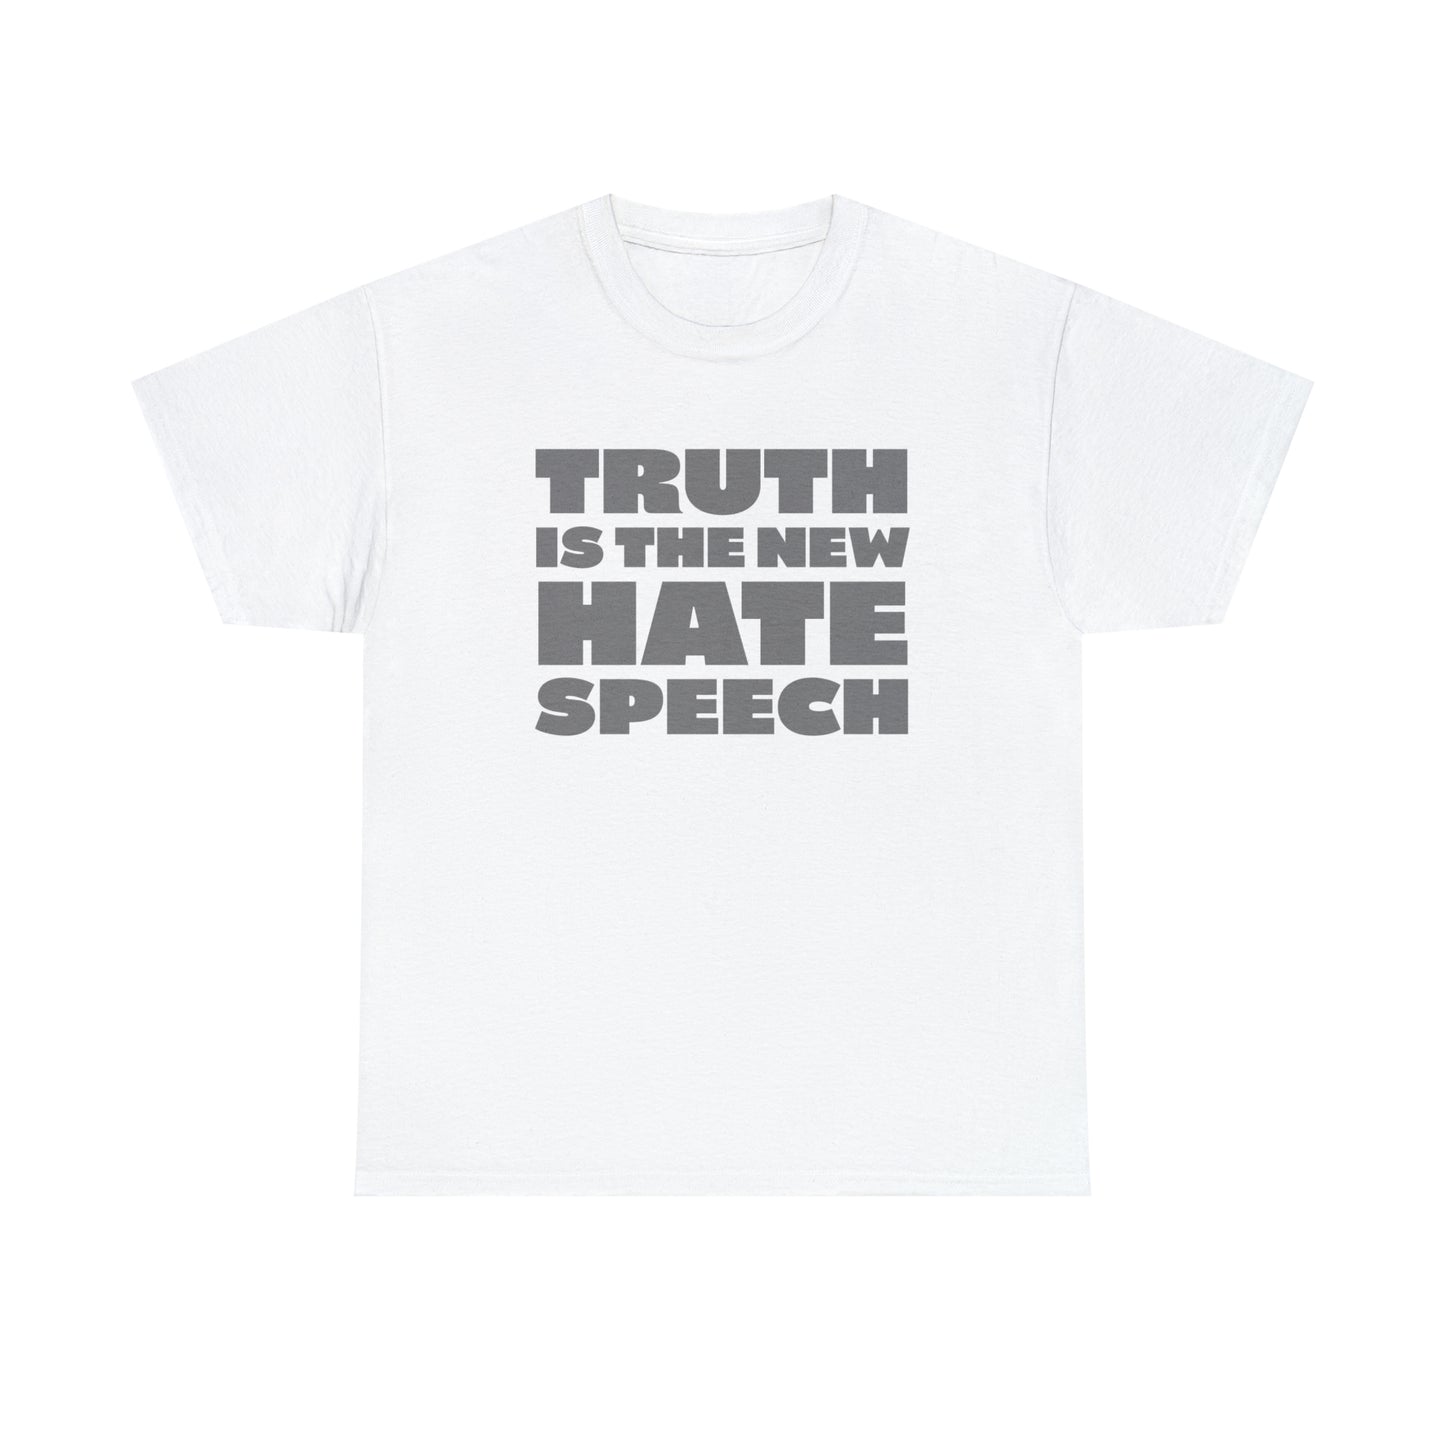 Truth T-Shirt For Hate Speech TShirt For Conservative T Shirt For Anti Woke Shirt For Right Wing Gift Idea